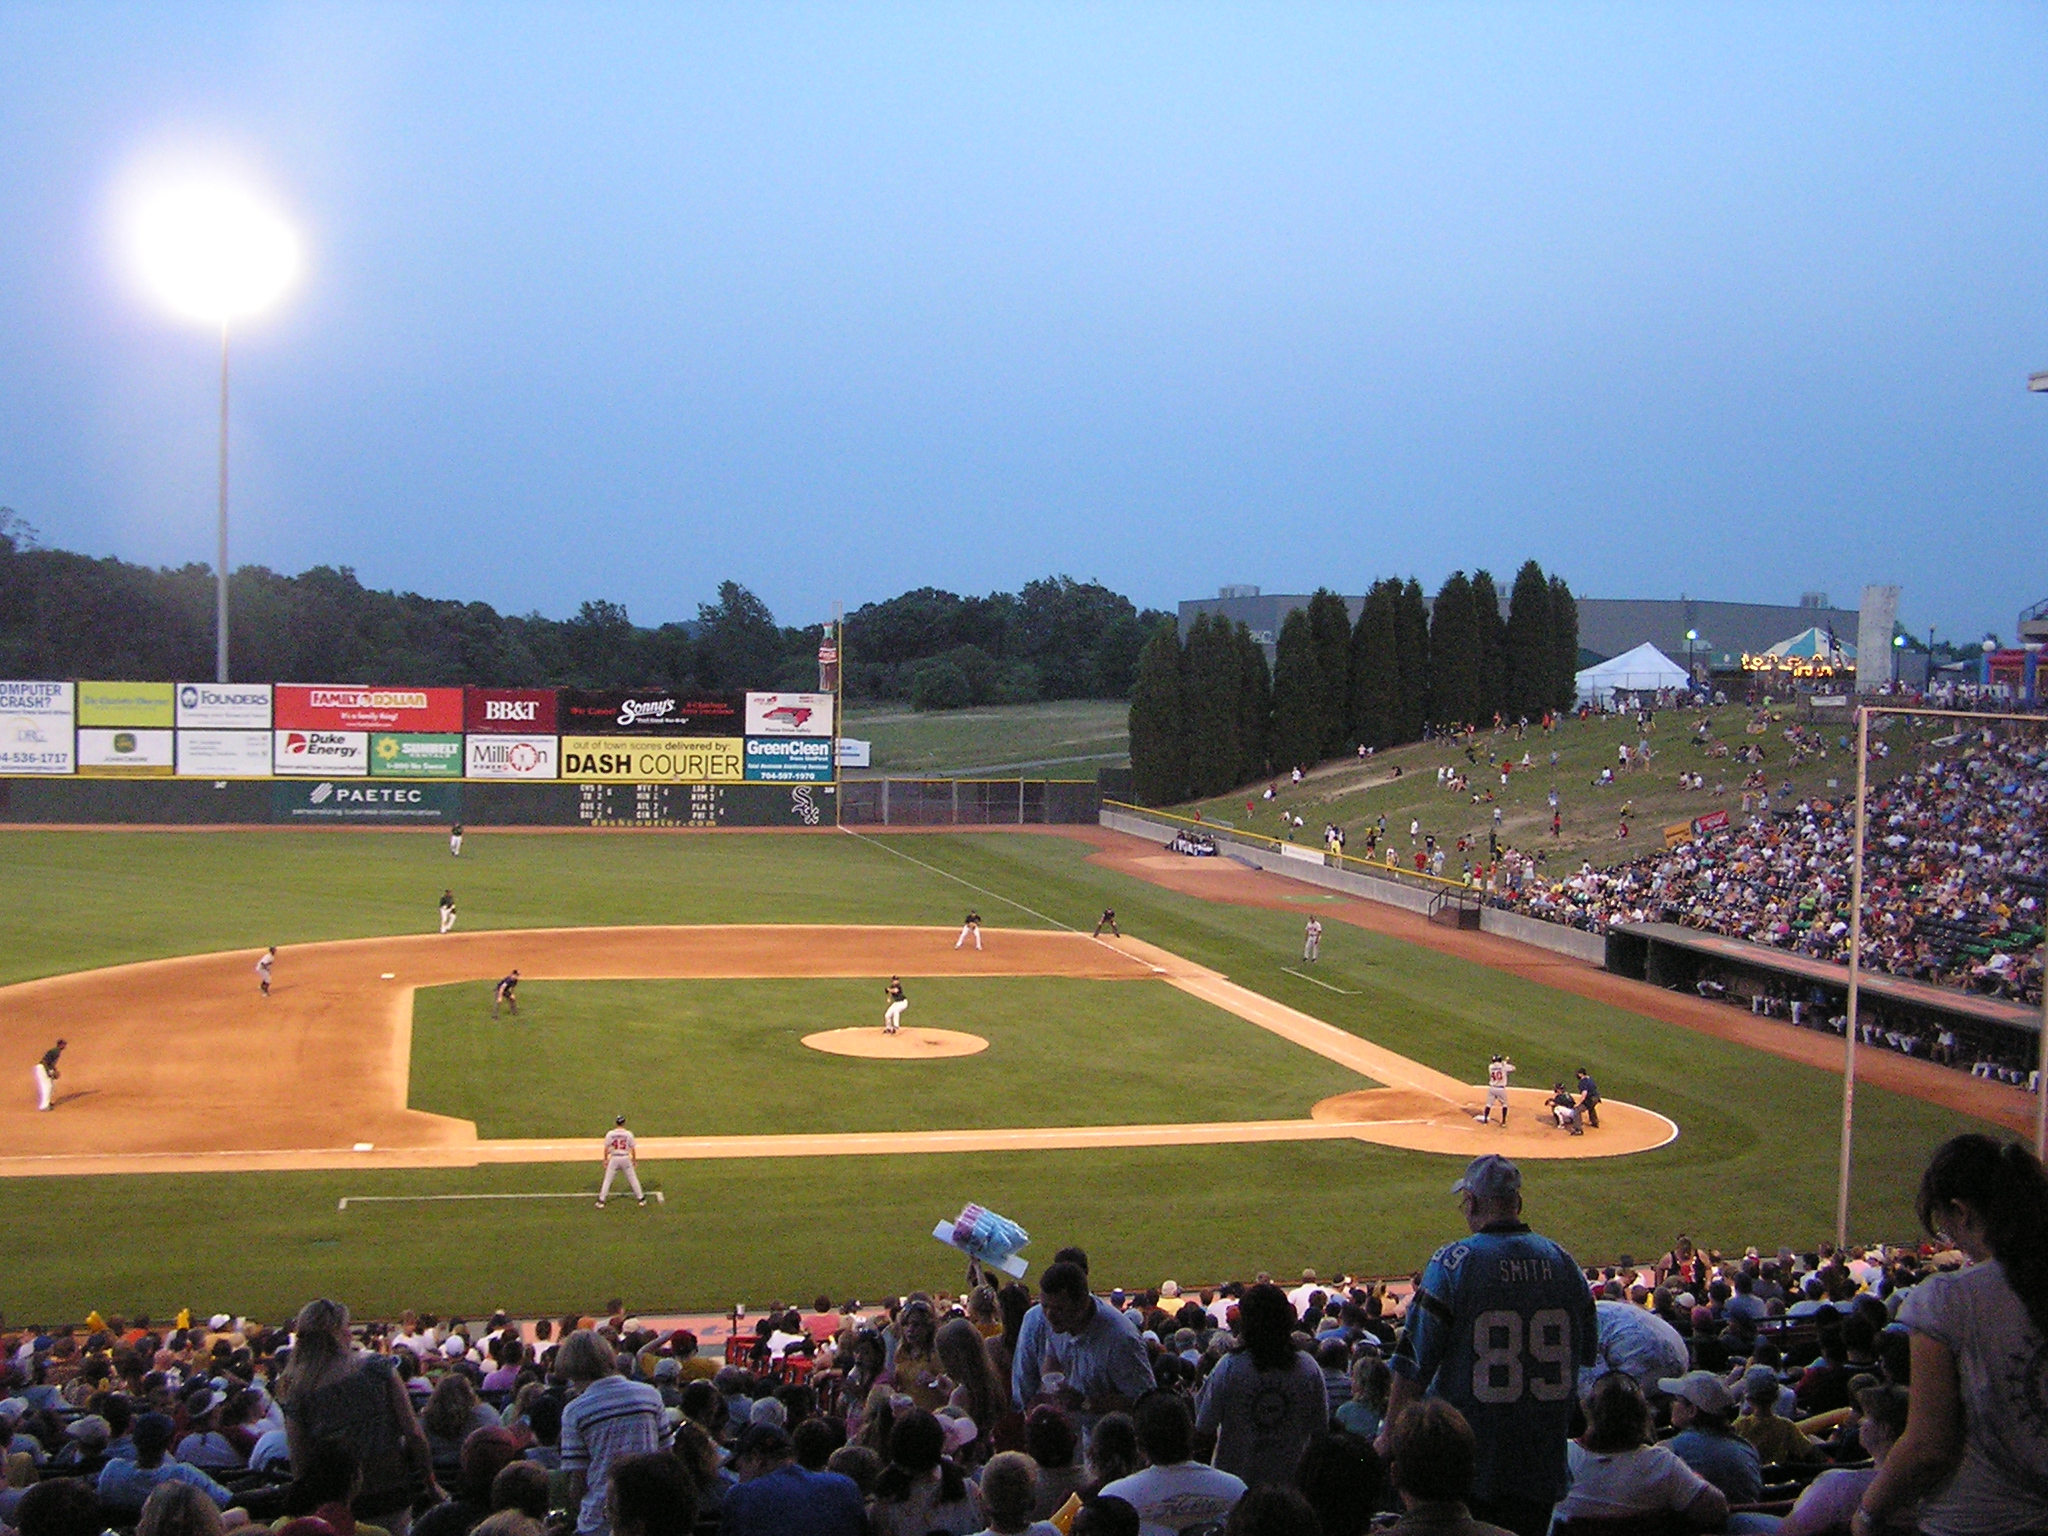 Knights Stadium from the 3rd base side